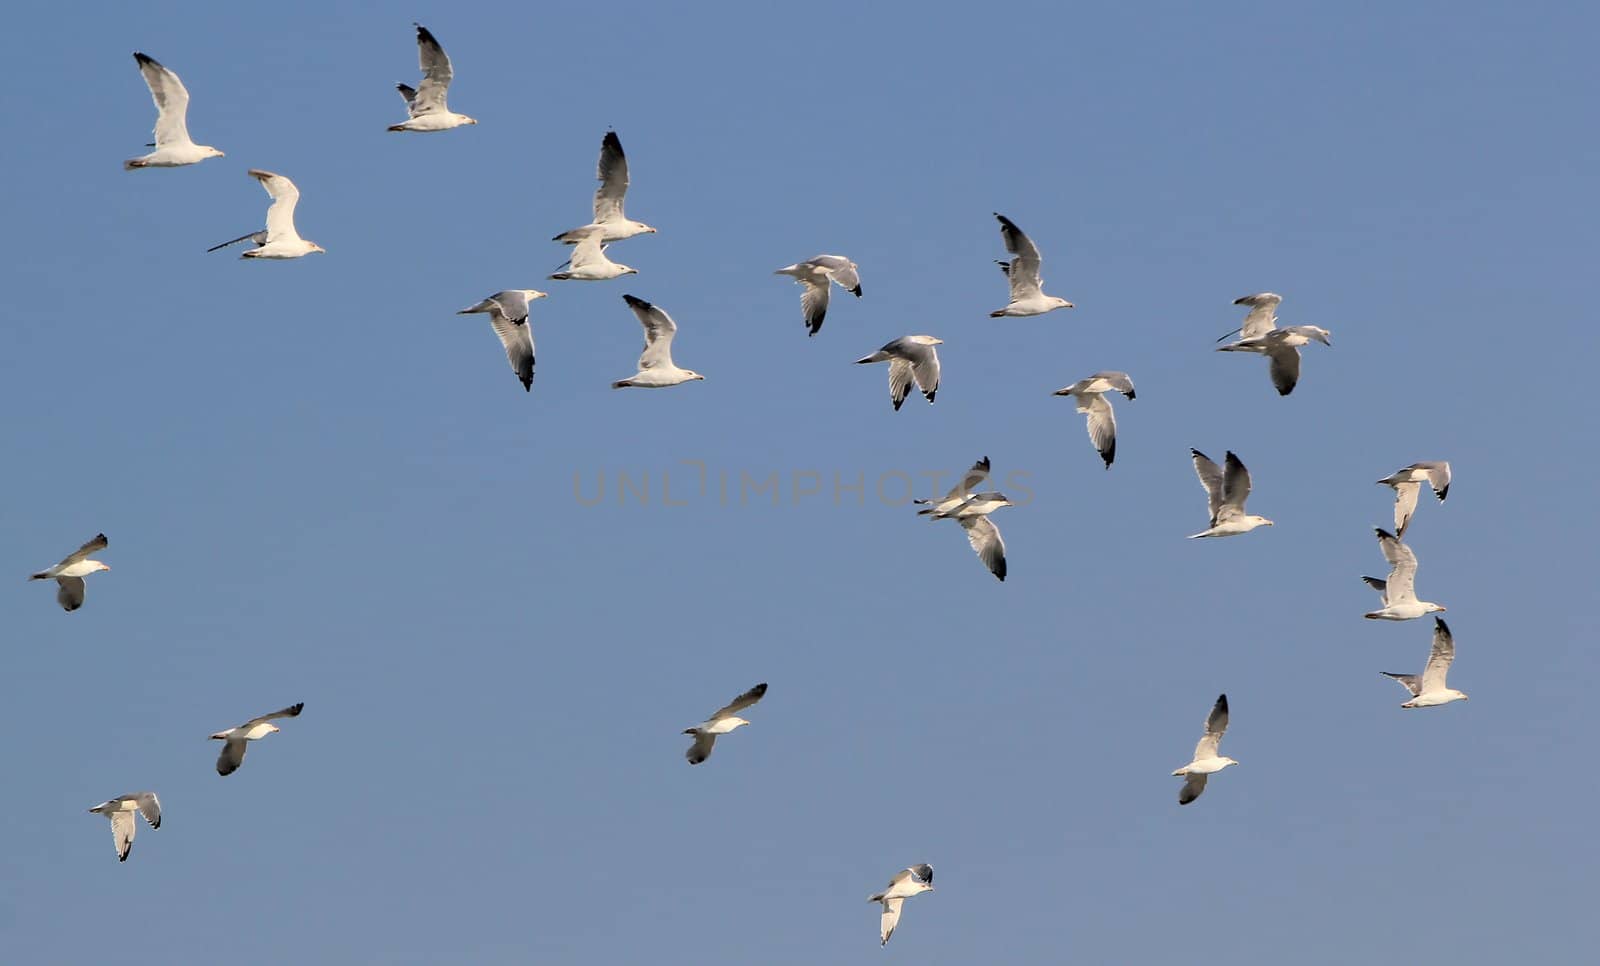 Group of seagulls flying in deep blue sky by beautiful weather